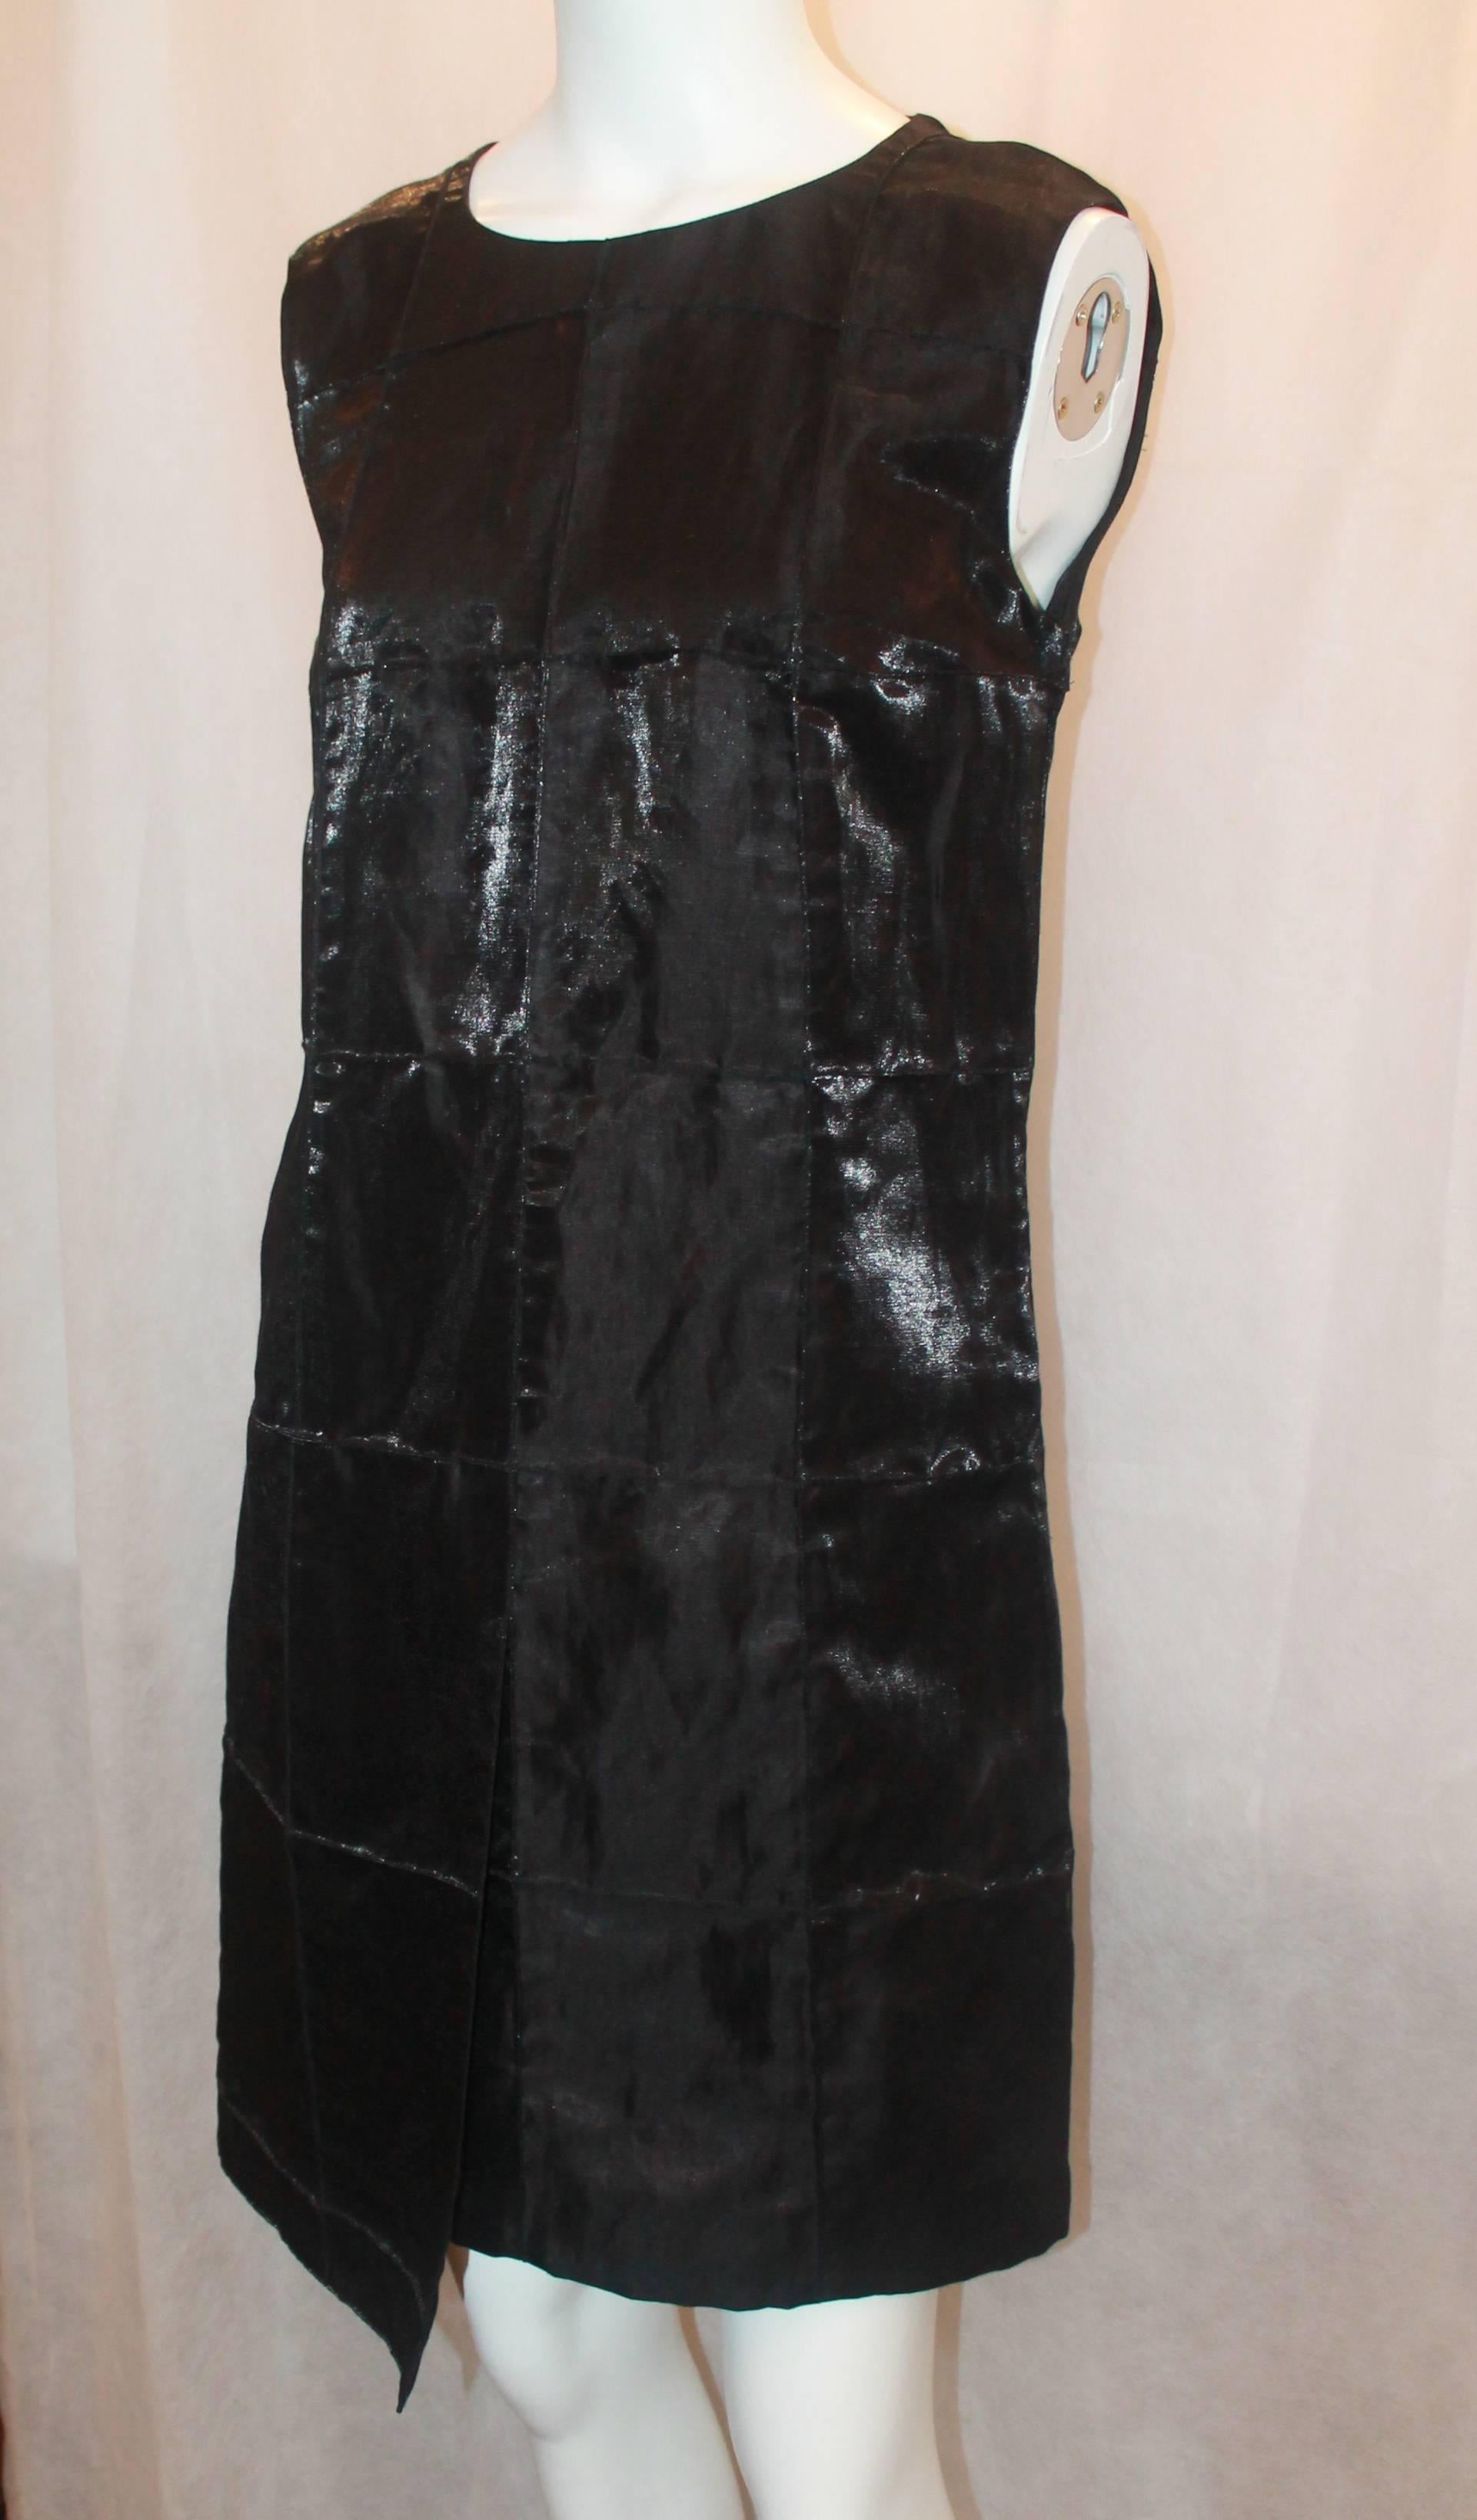 Chanel Black Metallic Quilted Asymmetrical Shift Dress - 40 - 1999. This dress is in excellent condition and has a slight metallic sheen to it. The fabric on the dress looks like it is sewn together piece by piece and it has a small 